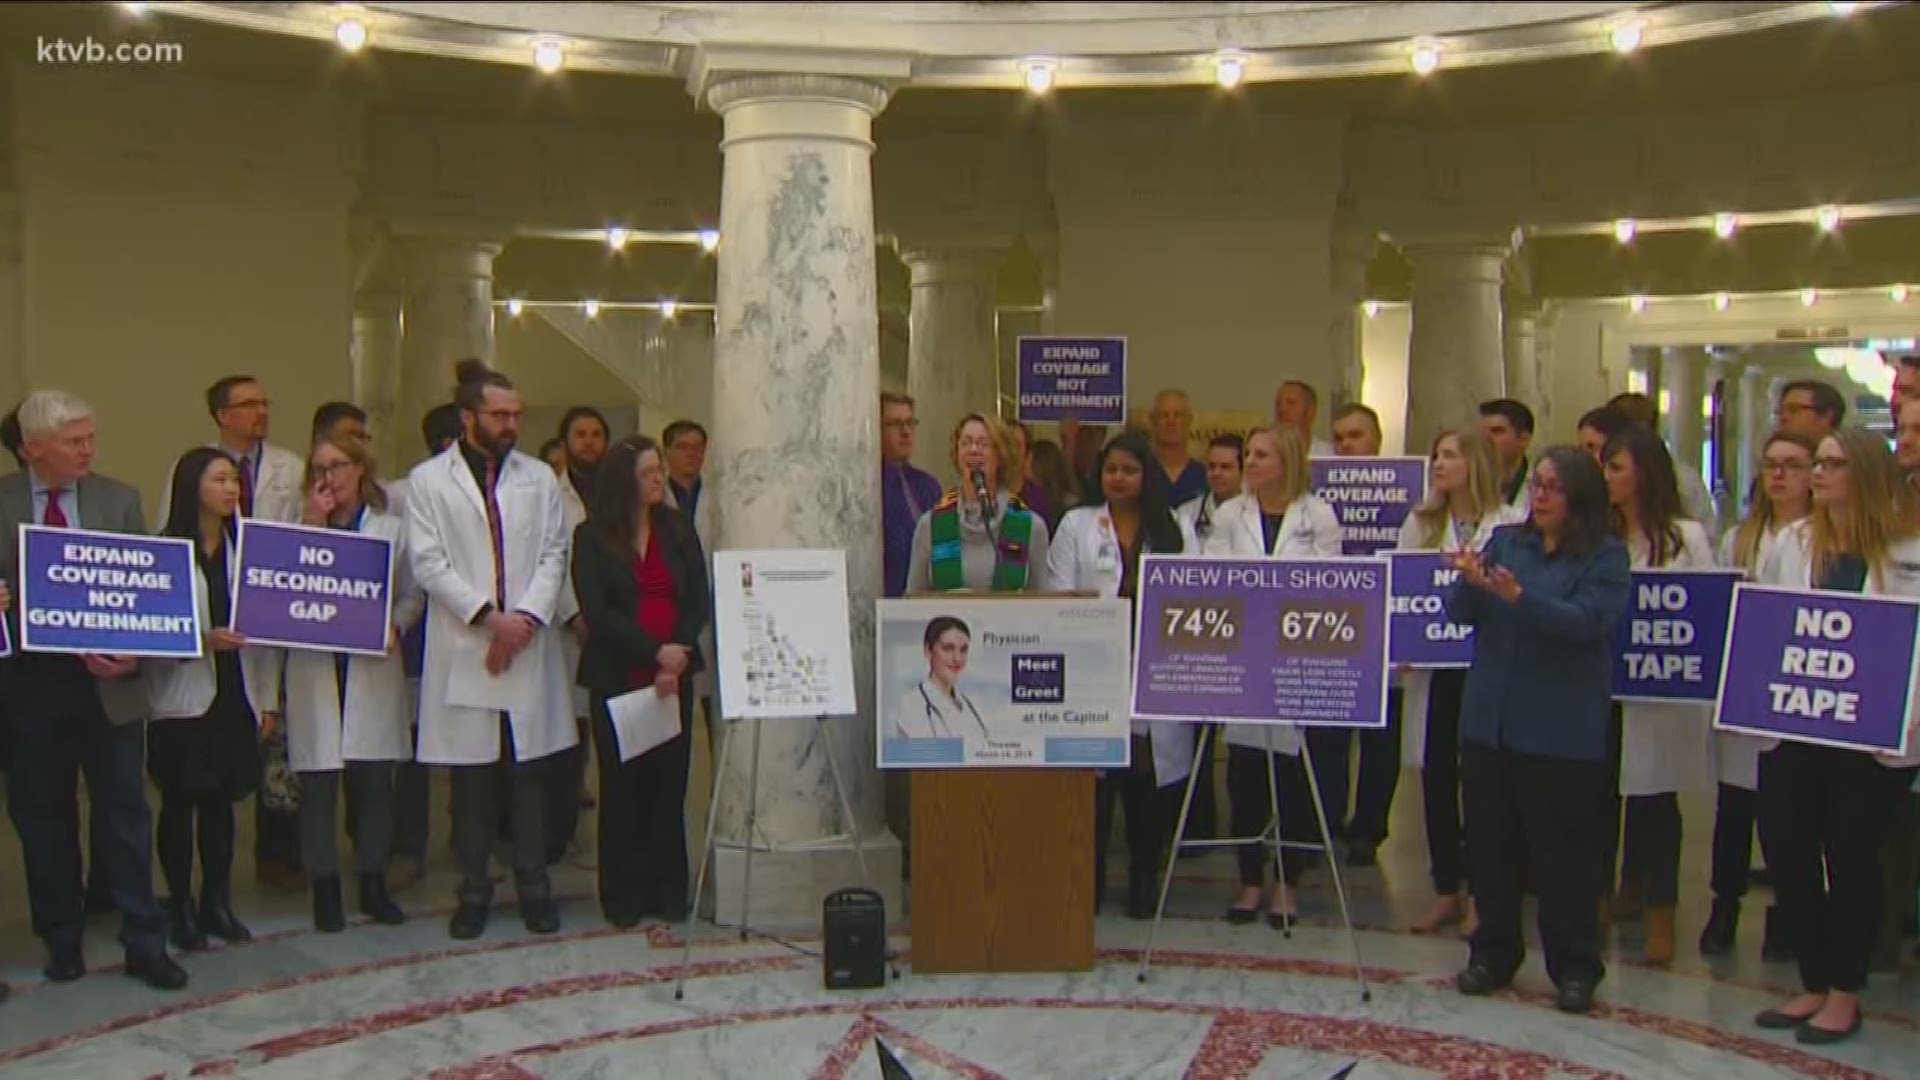 Doctors and nurses are urging lawmakers to adopt Medicaid expansion without any additional requirements.